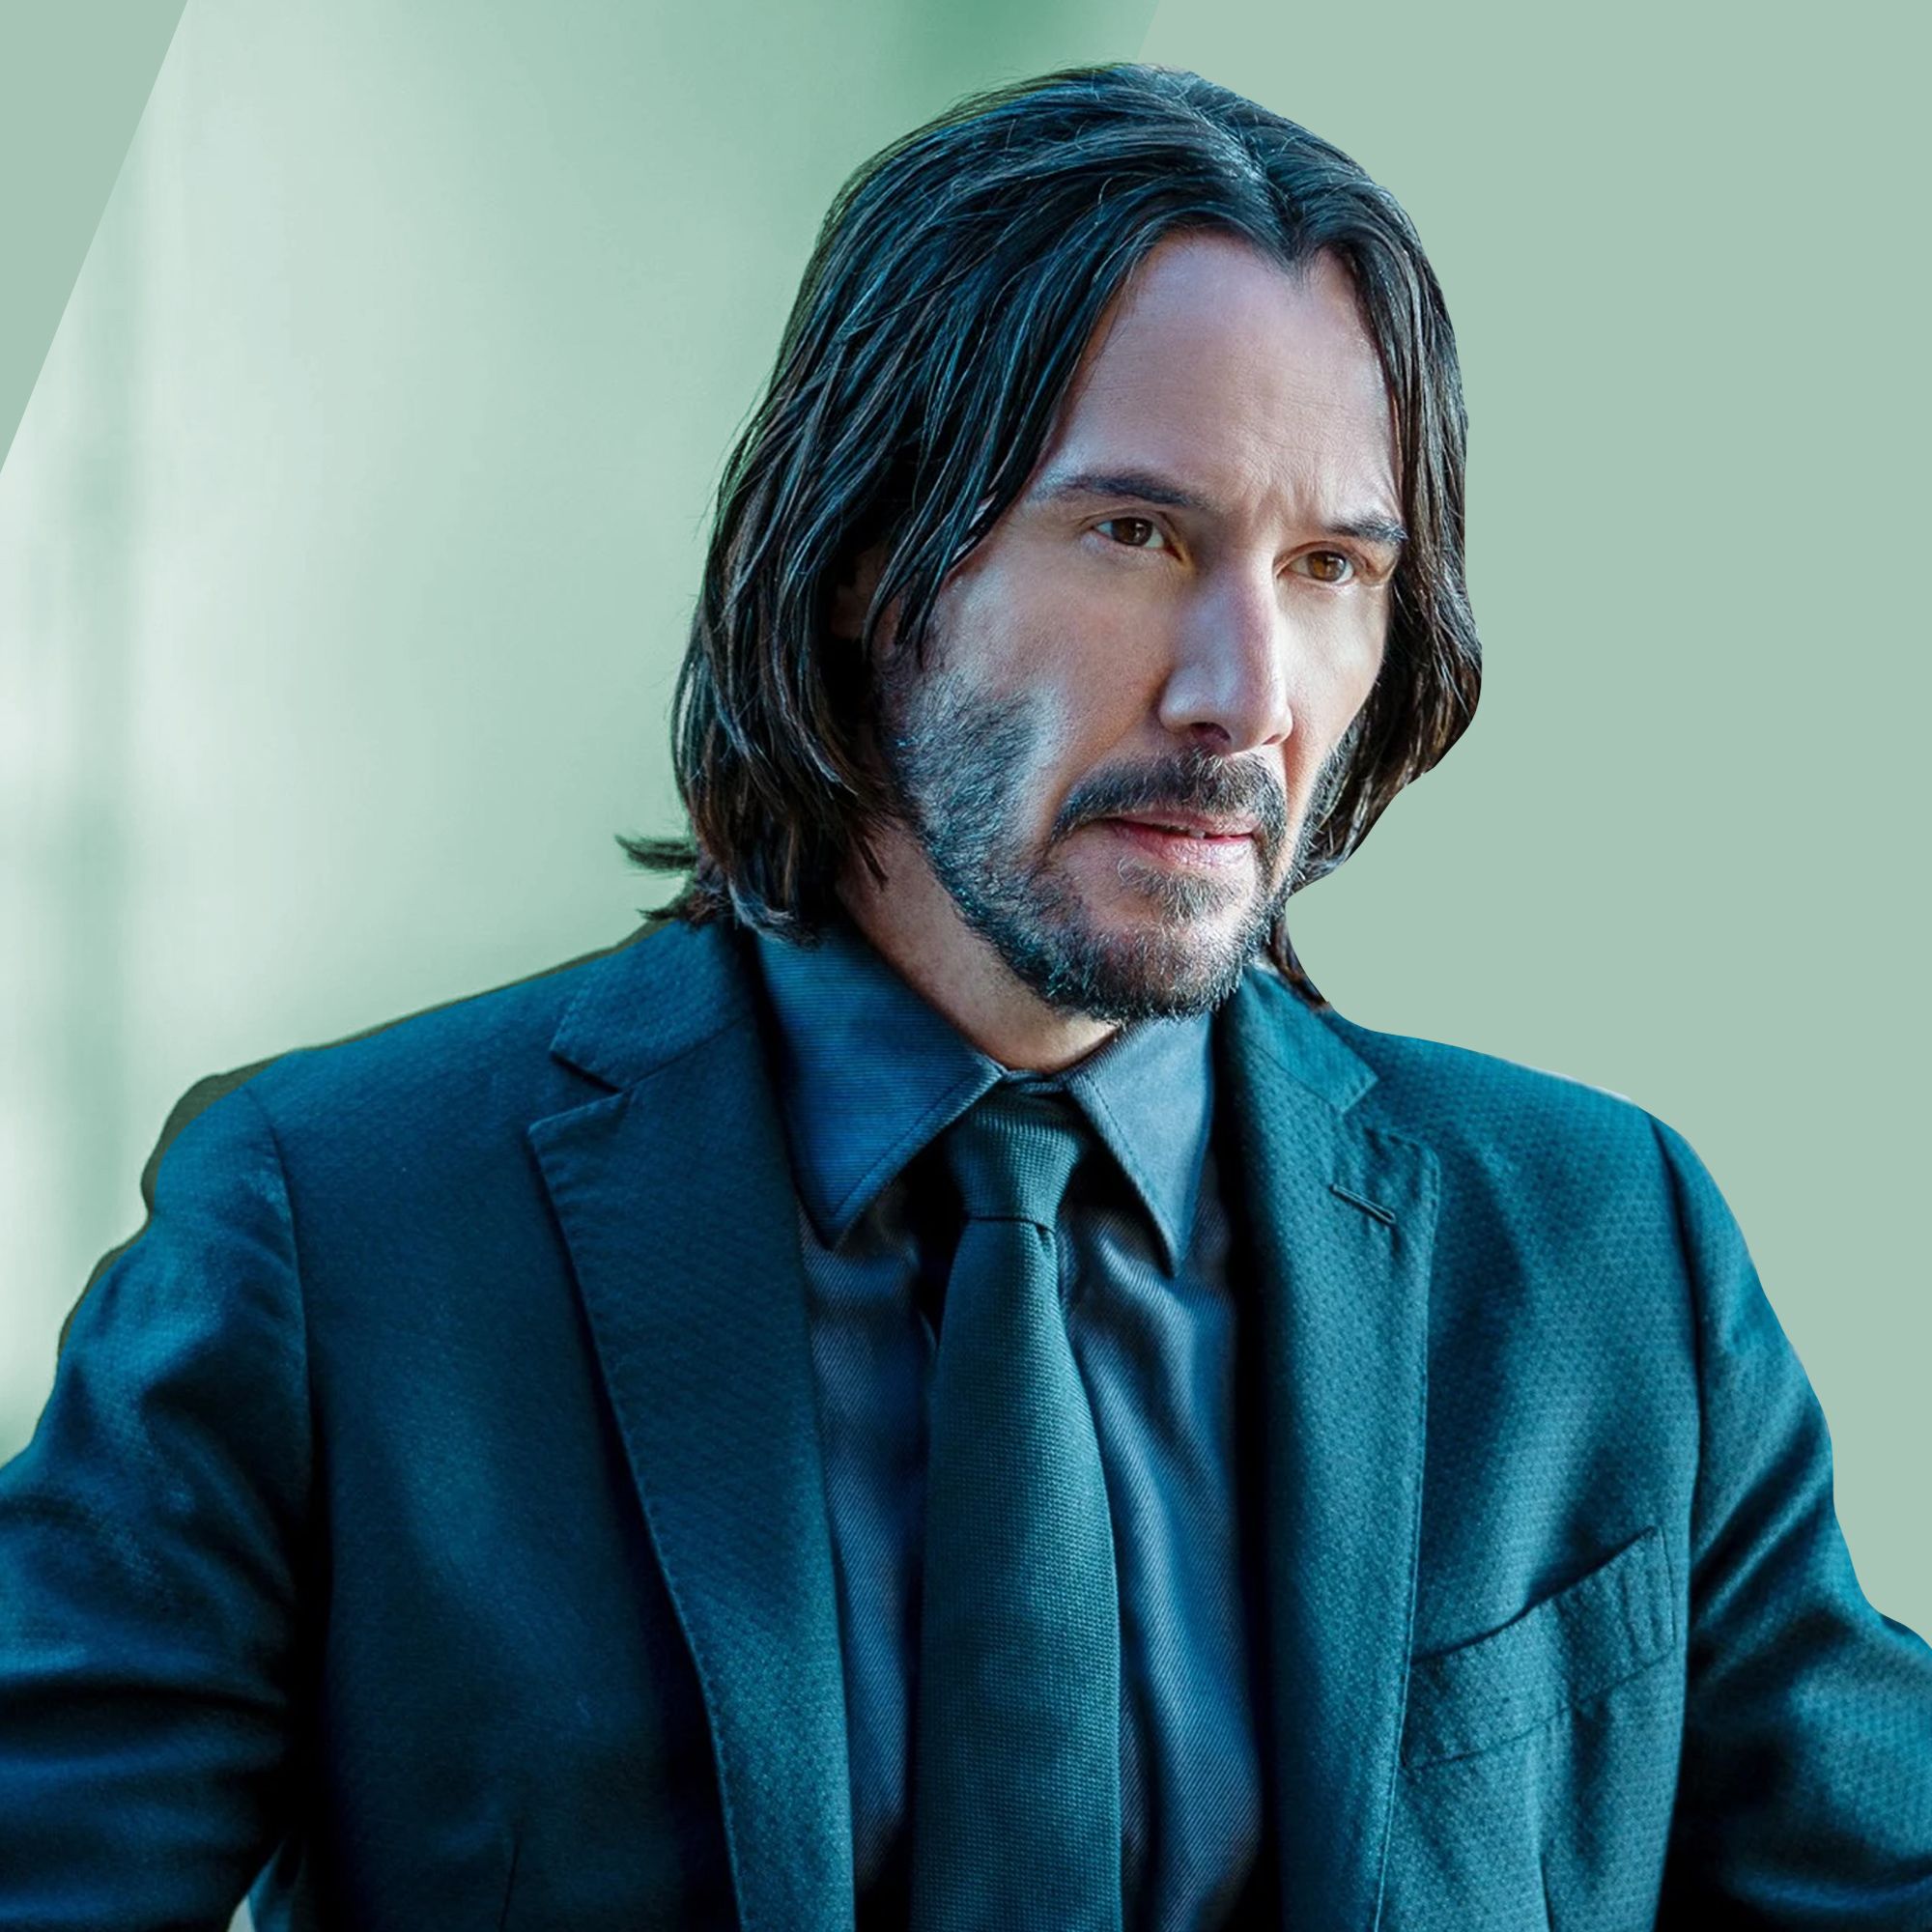 Can We Please Let John Wick Rest in Peace?